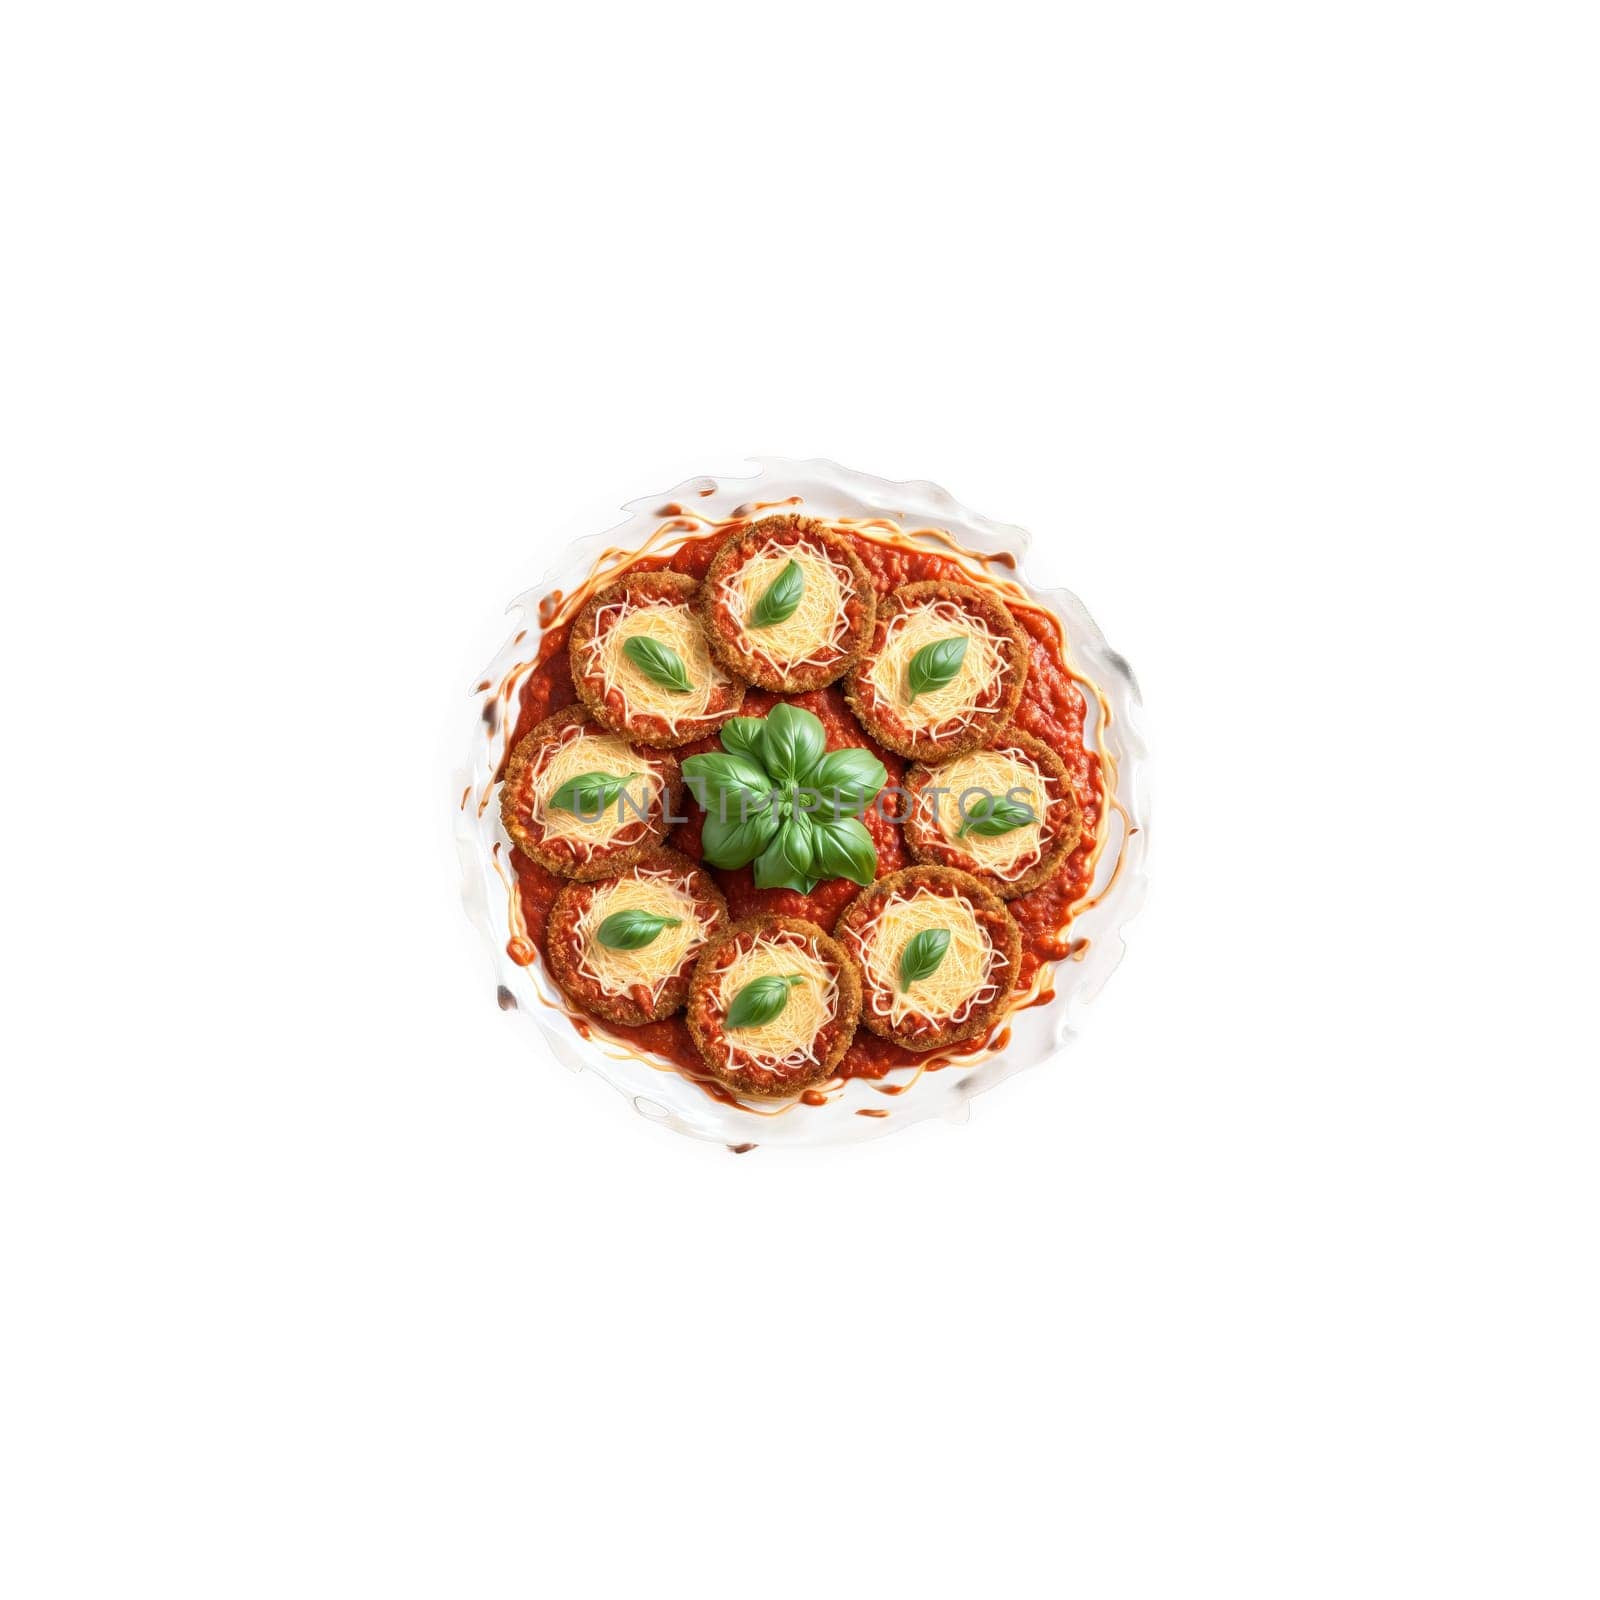 Eggplant Parmesan Mandala breaded eggplant slices with tomato sauce and melted cheese arranged in a. Food isolated on transparent background.